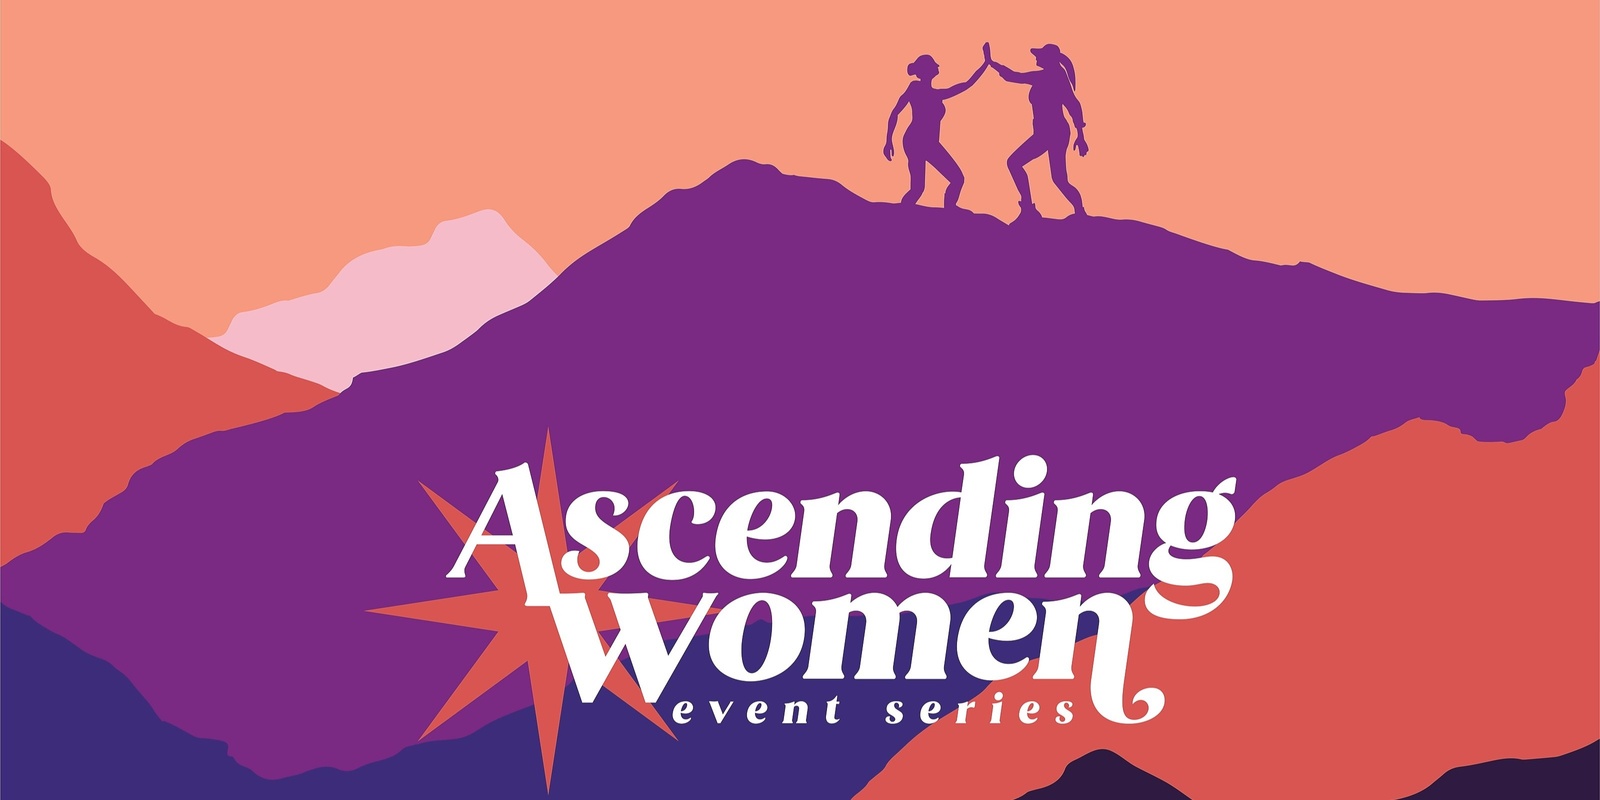 Ascending Women: Lifting up the Voice of Others